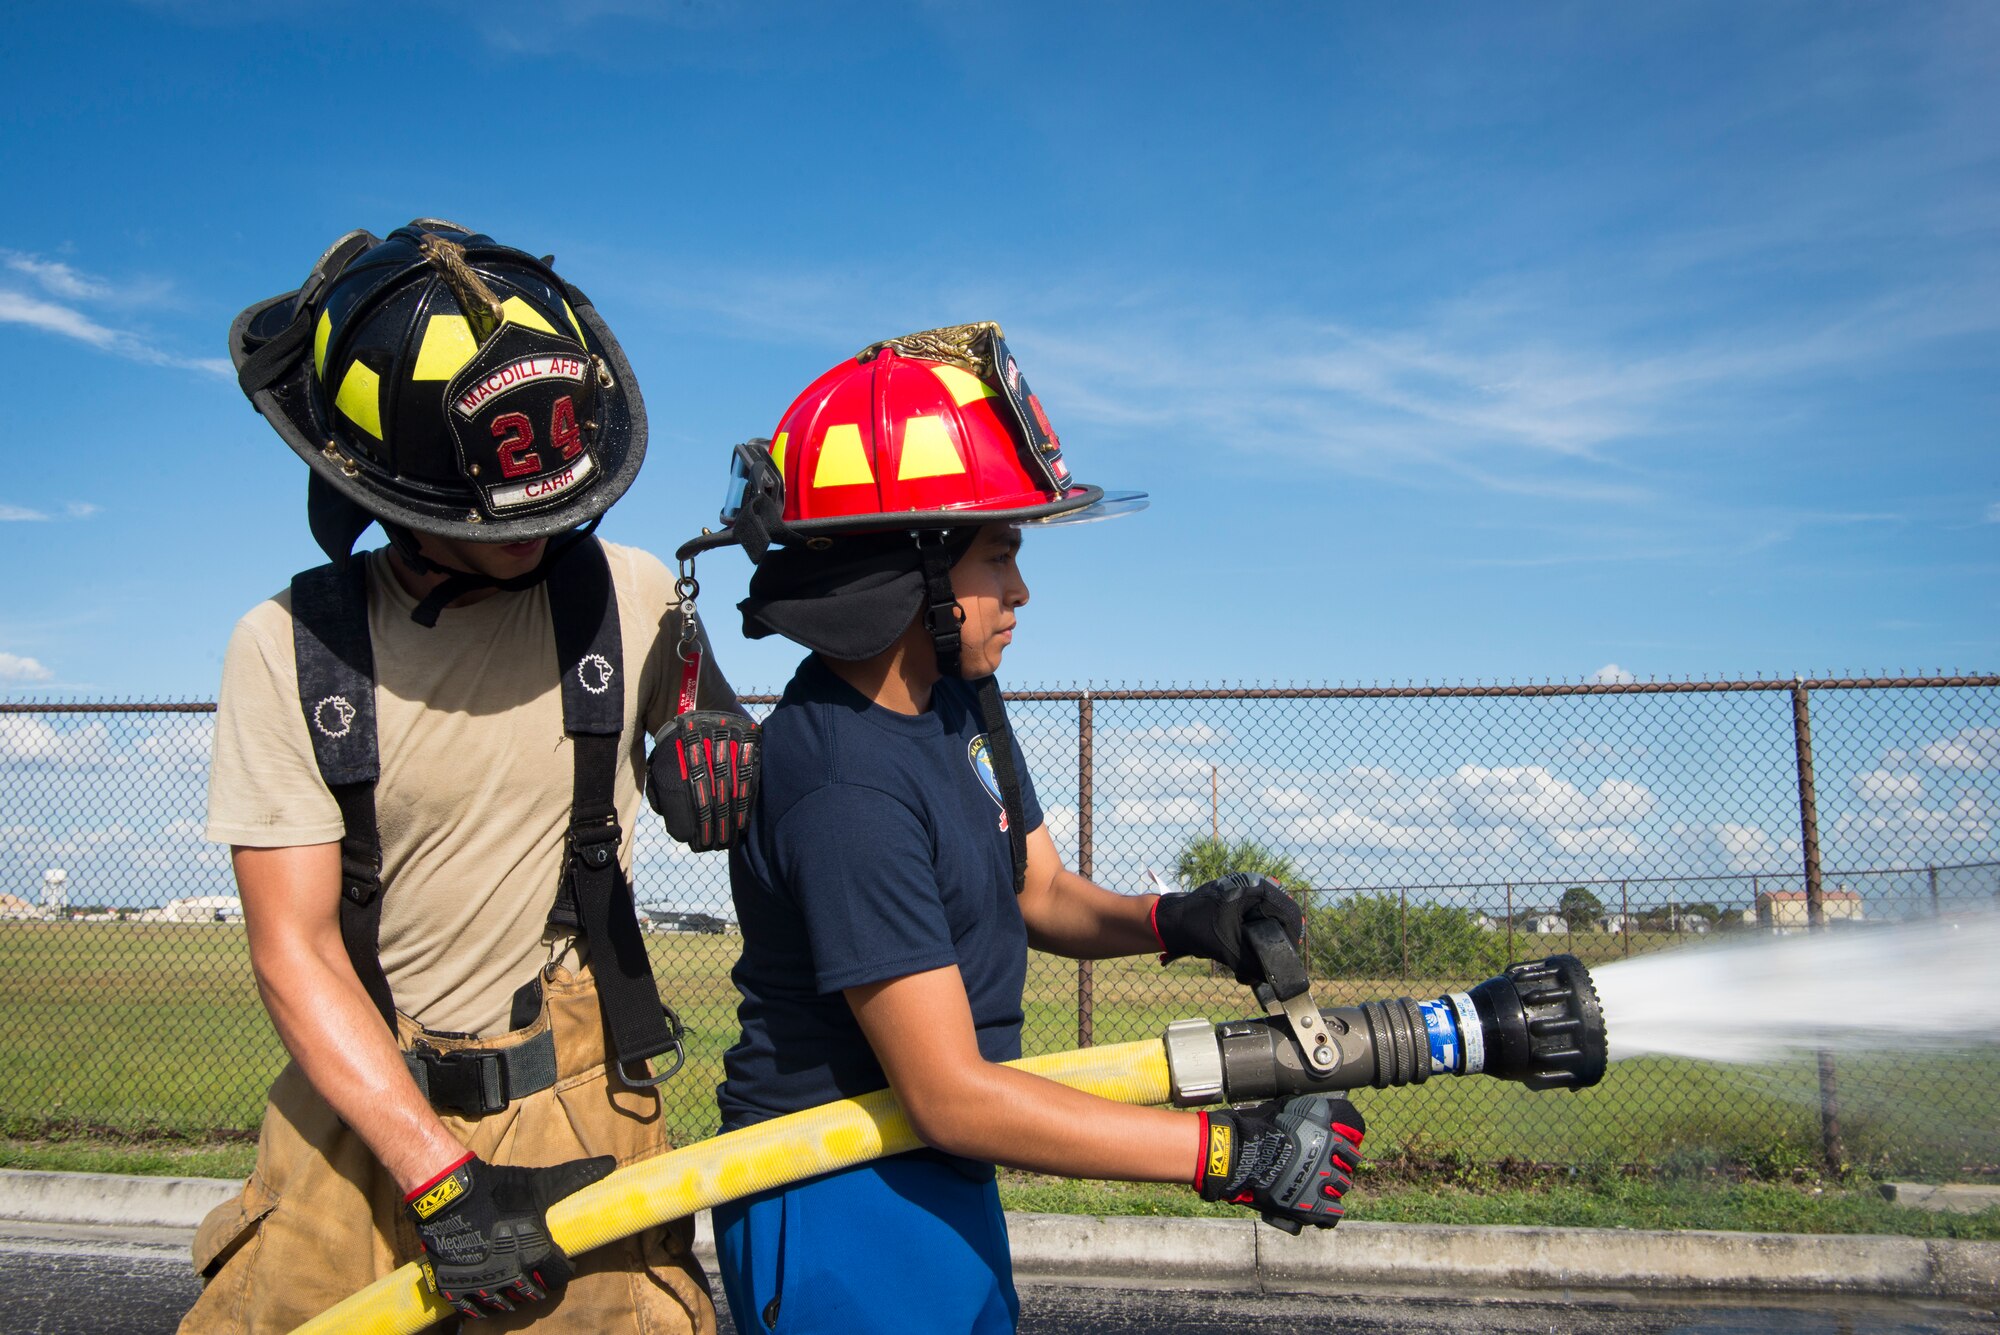 Senior Airman Kenneth Carr, a 6th Civil Engineer Squadron (CES) Fire Emergency Services (FES) Flight firefighter, teaches a student how to operate a fire hose at MacDill Air Force Base, Fla., Oct. 15, 2019.